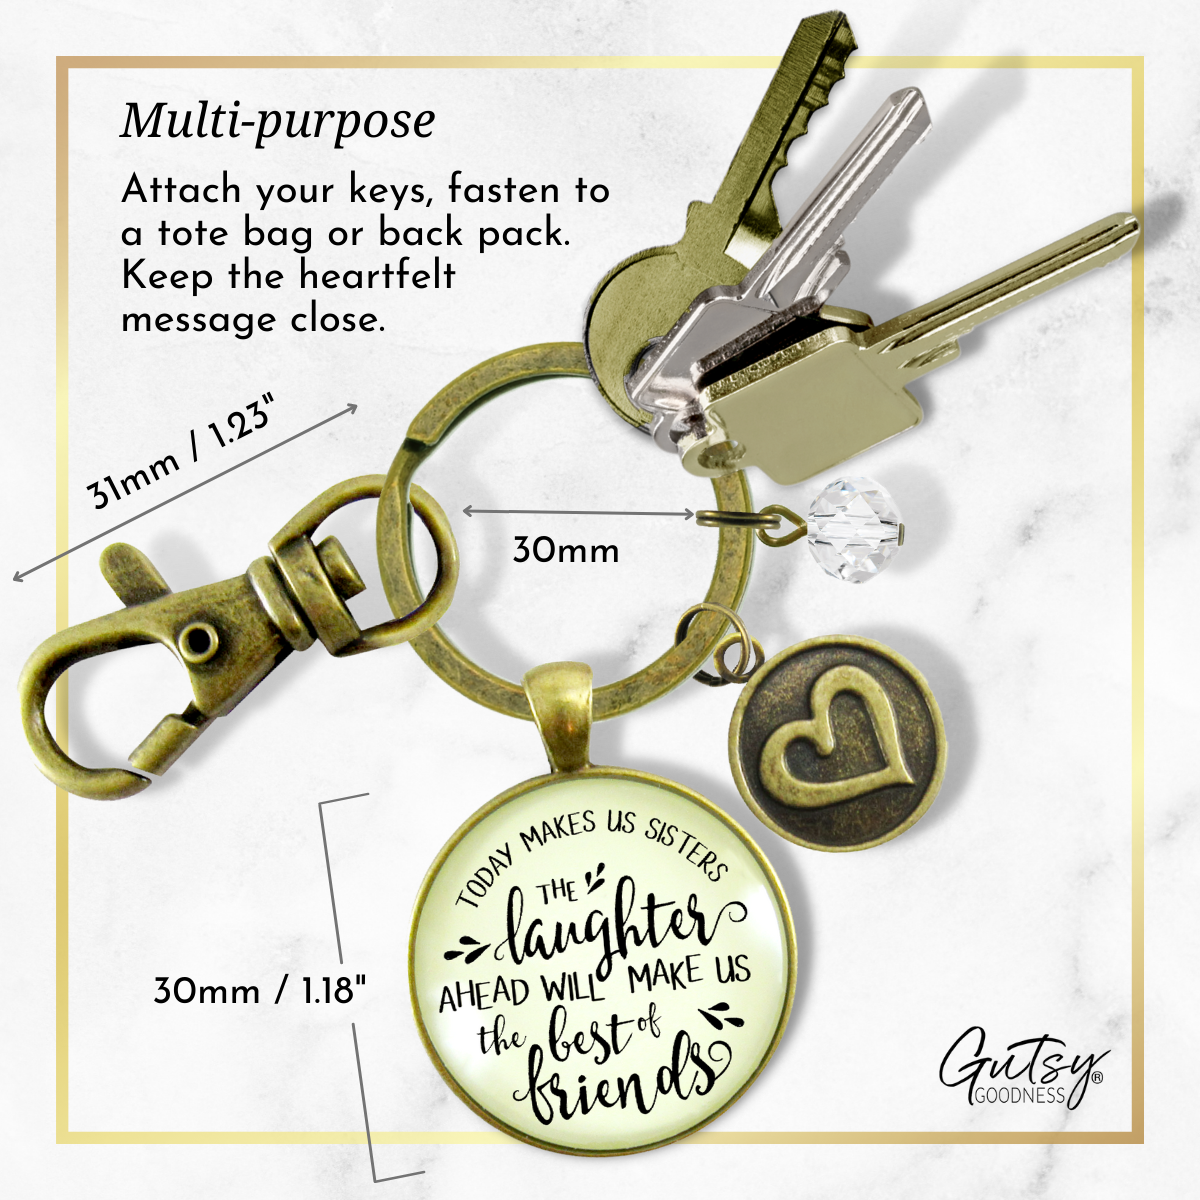 Sister In Law Keychain Today Makes Us Sisters Laughter Best Friends Wedding Day Jewelry Gift - Gutsy Goodness Handmade Jewelry;Sister In Law Keychain Today Makes Us Sisters Laughter Best Friends Wedding Day Jewelry Gift - Gutsy Goodness Handmade Jewelry Gifts